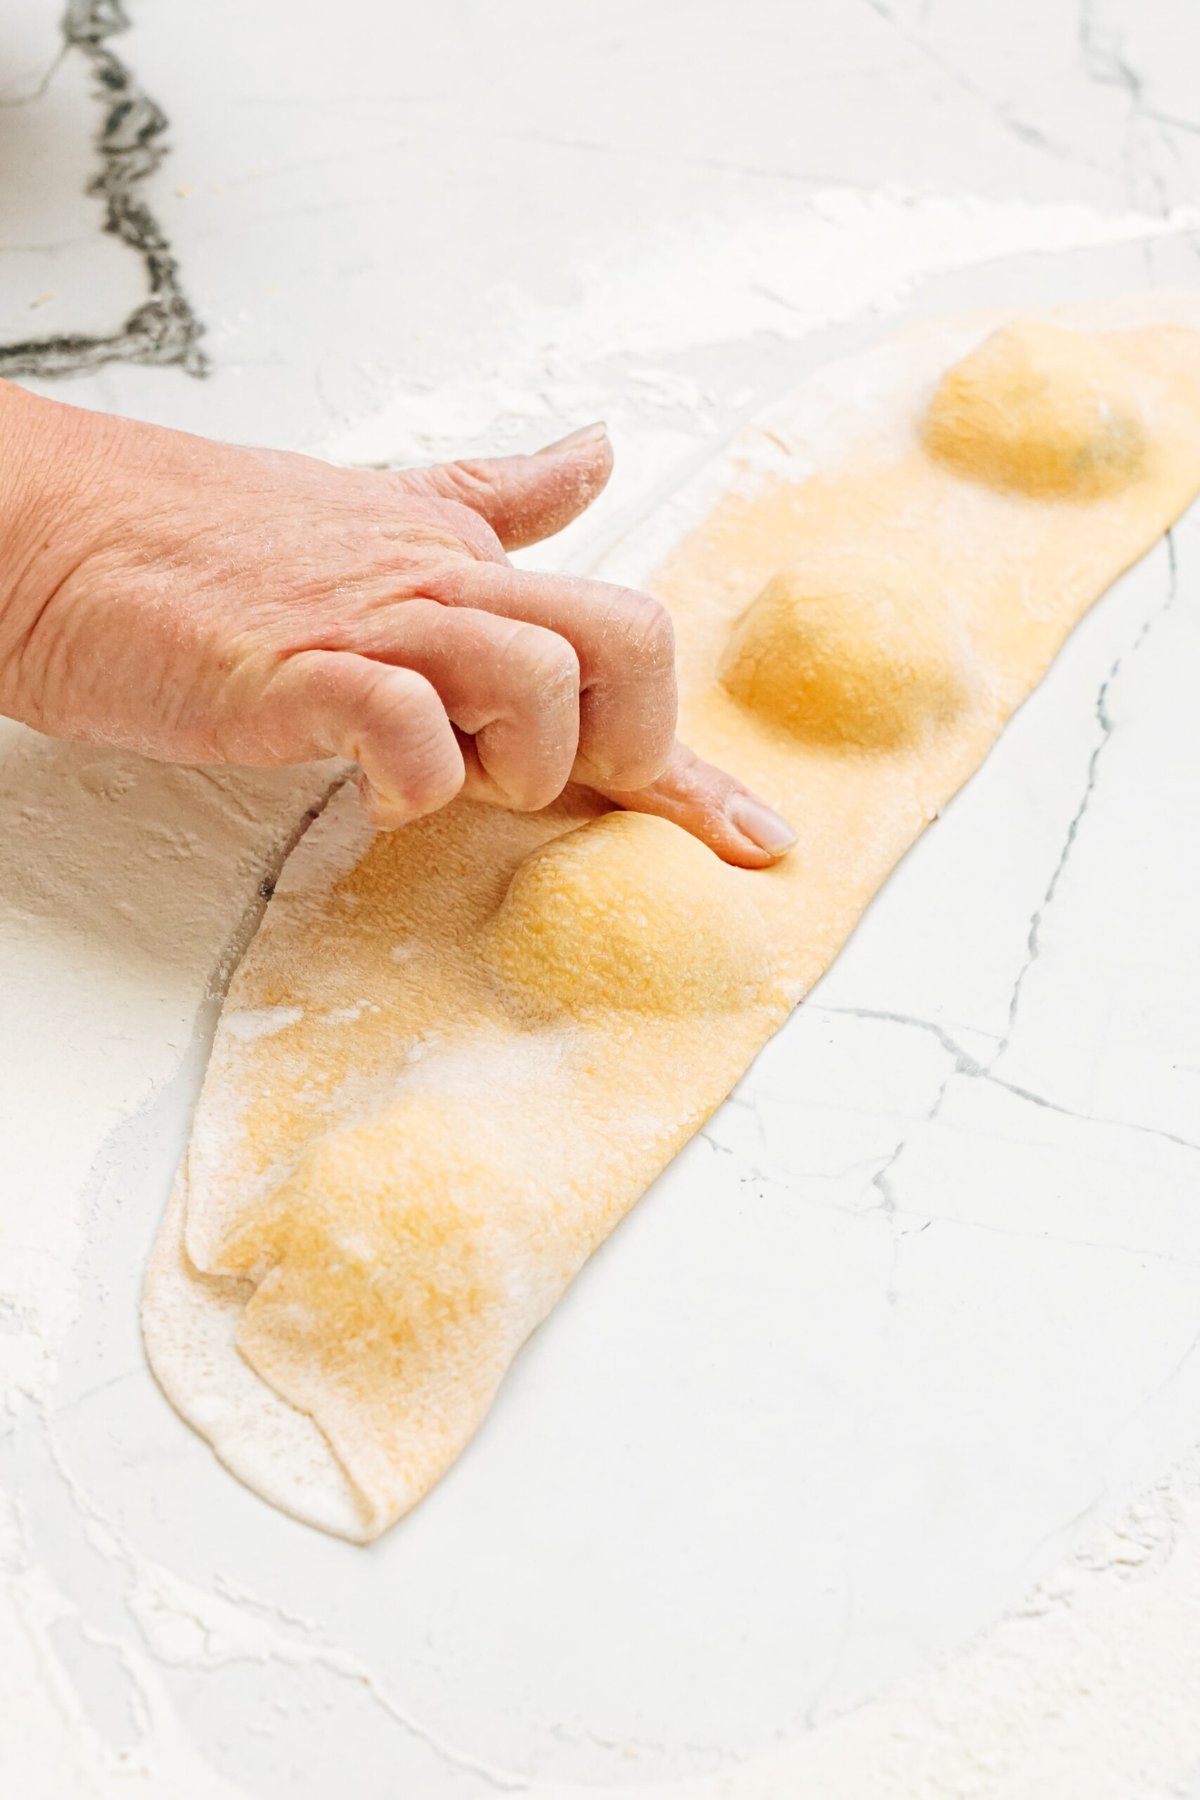 A person pressing dough around the edges of the filing, creating a pocket